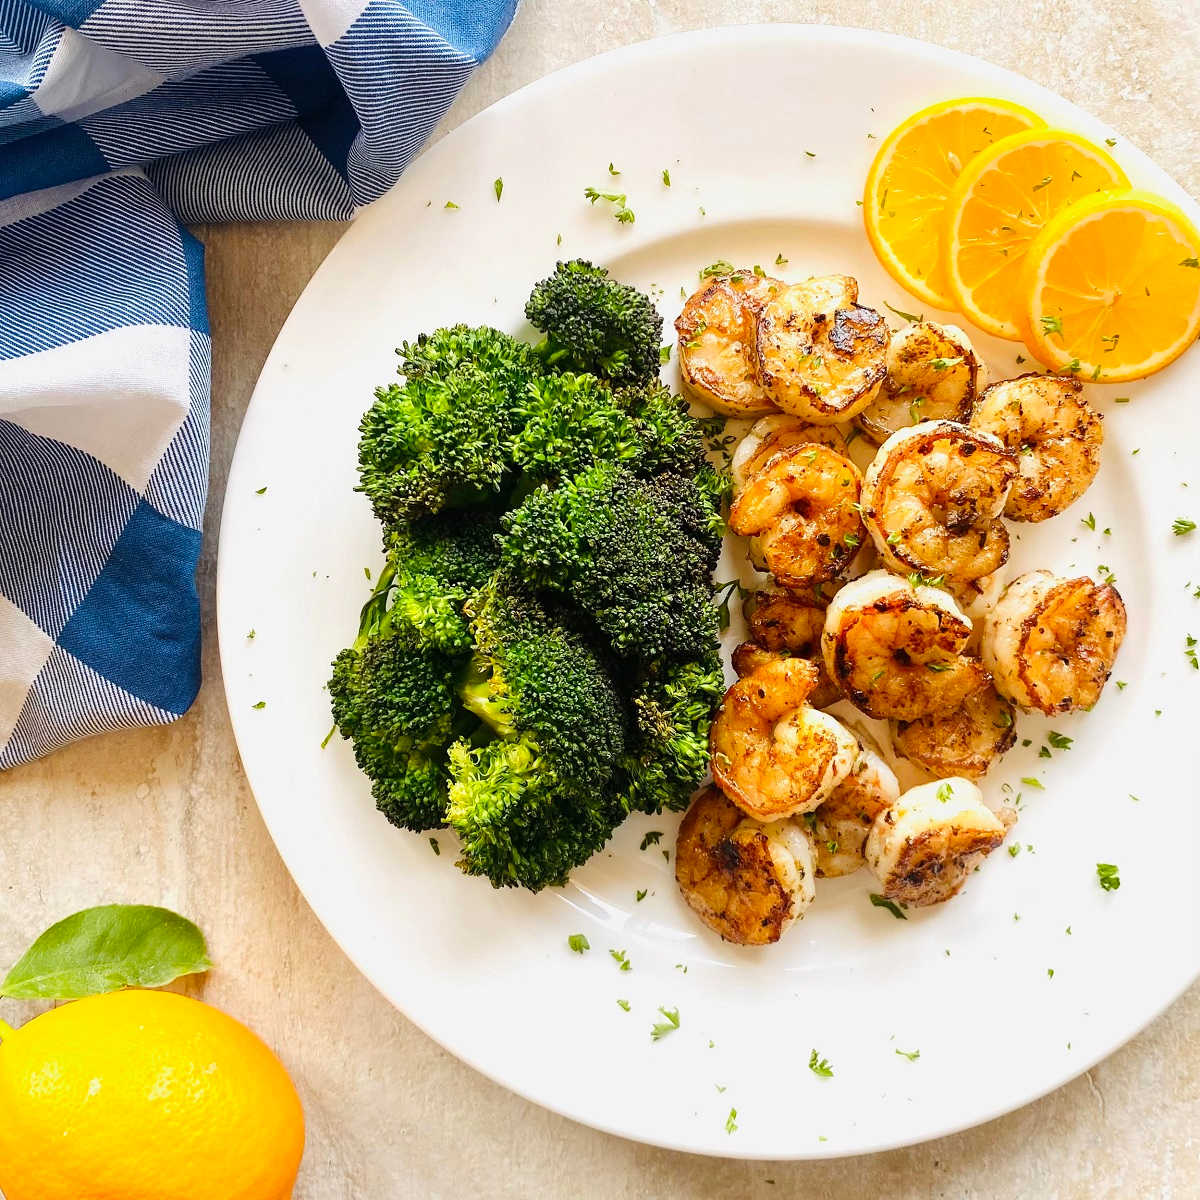 seared shrimp recipe with sides and a blue linen.